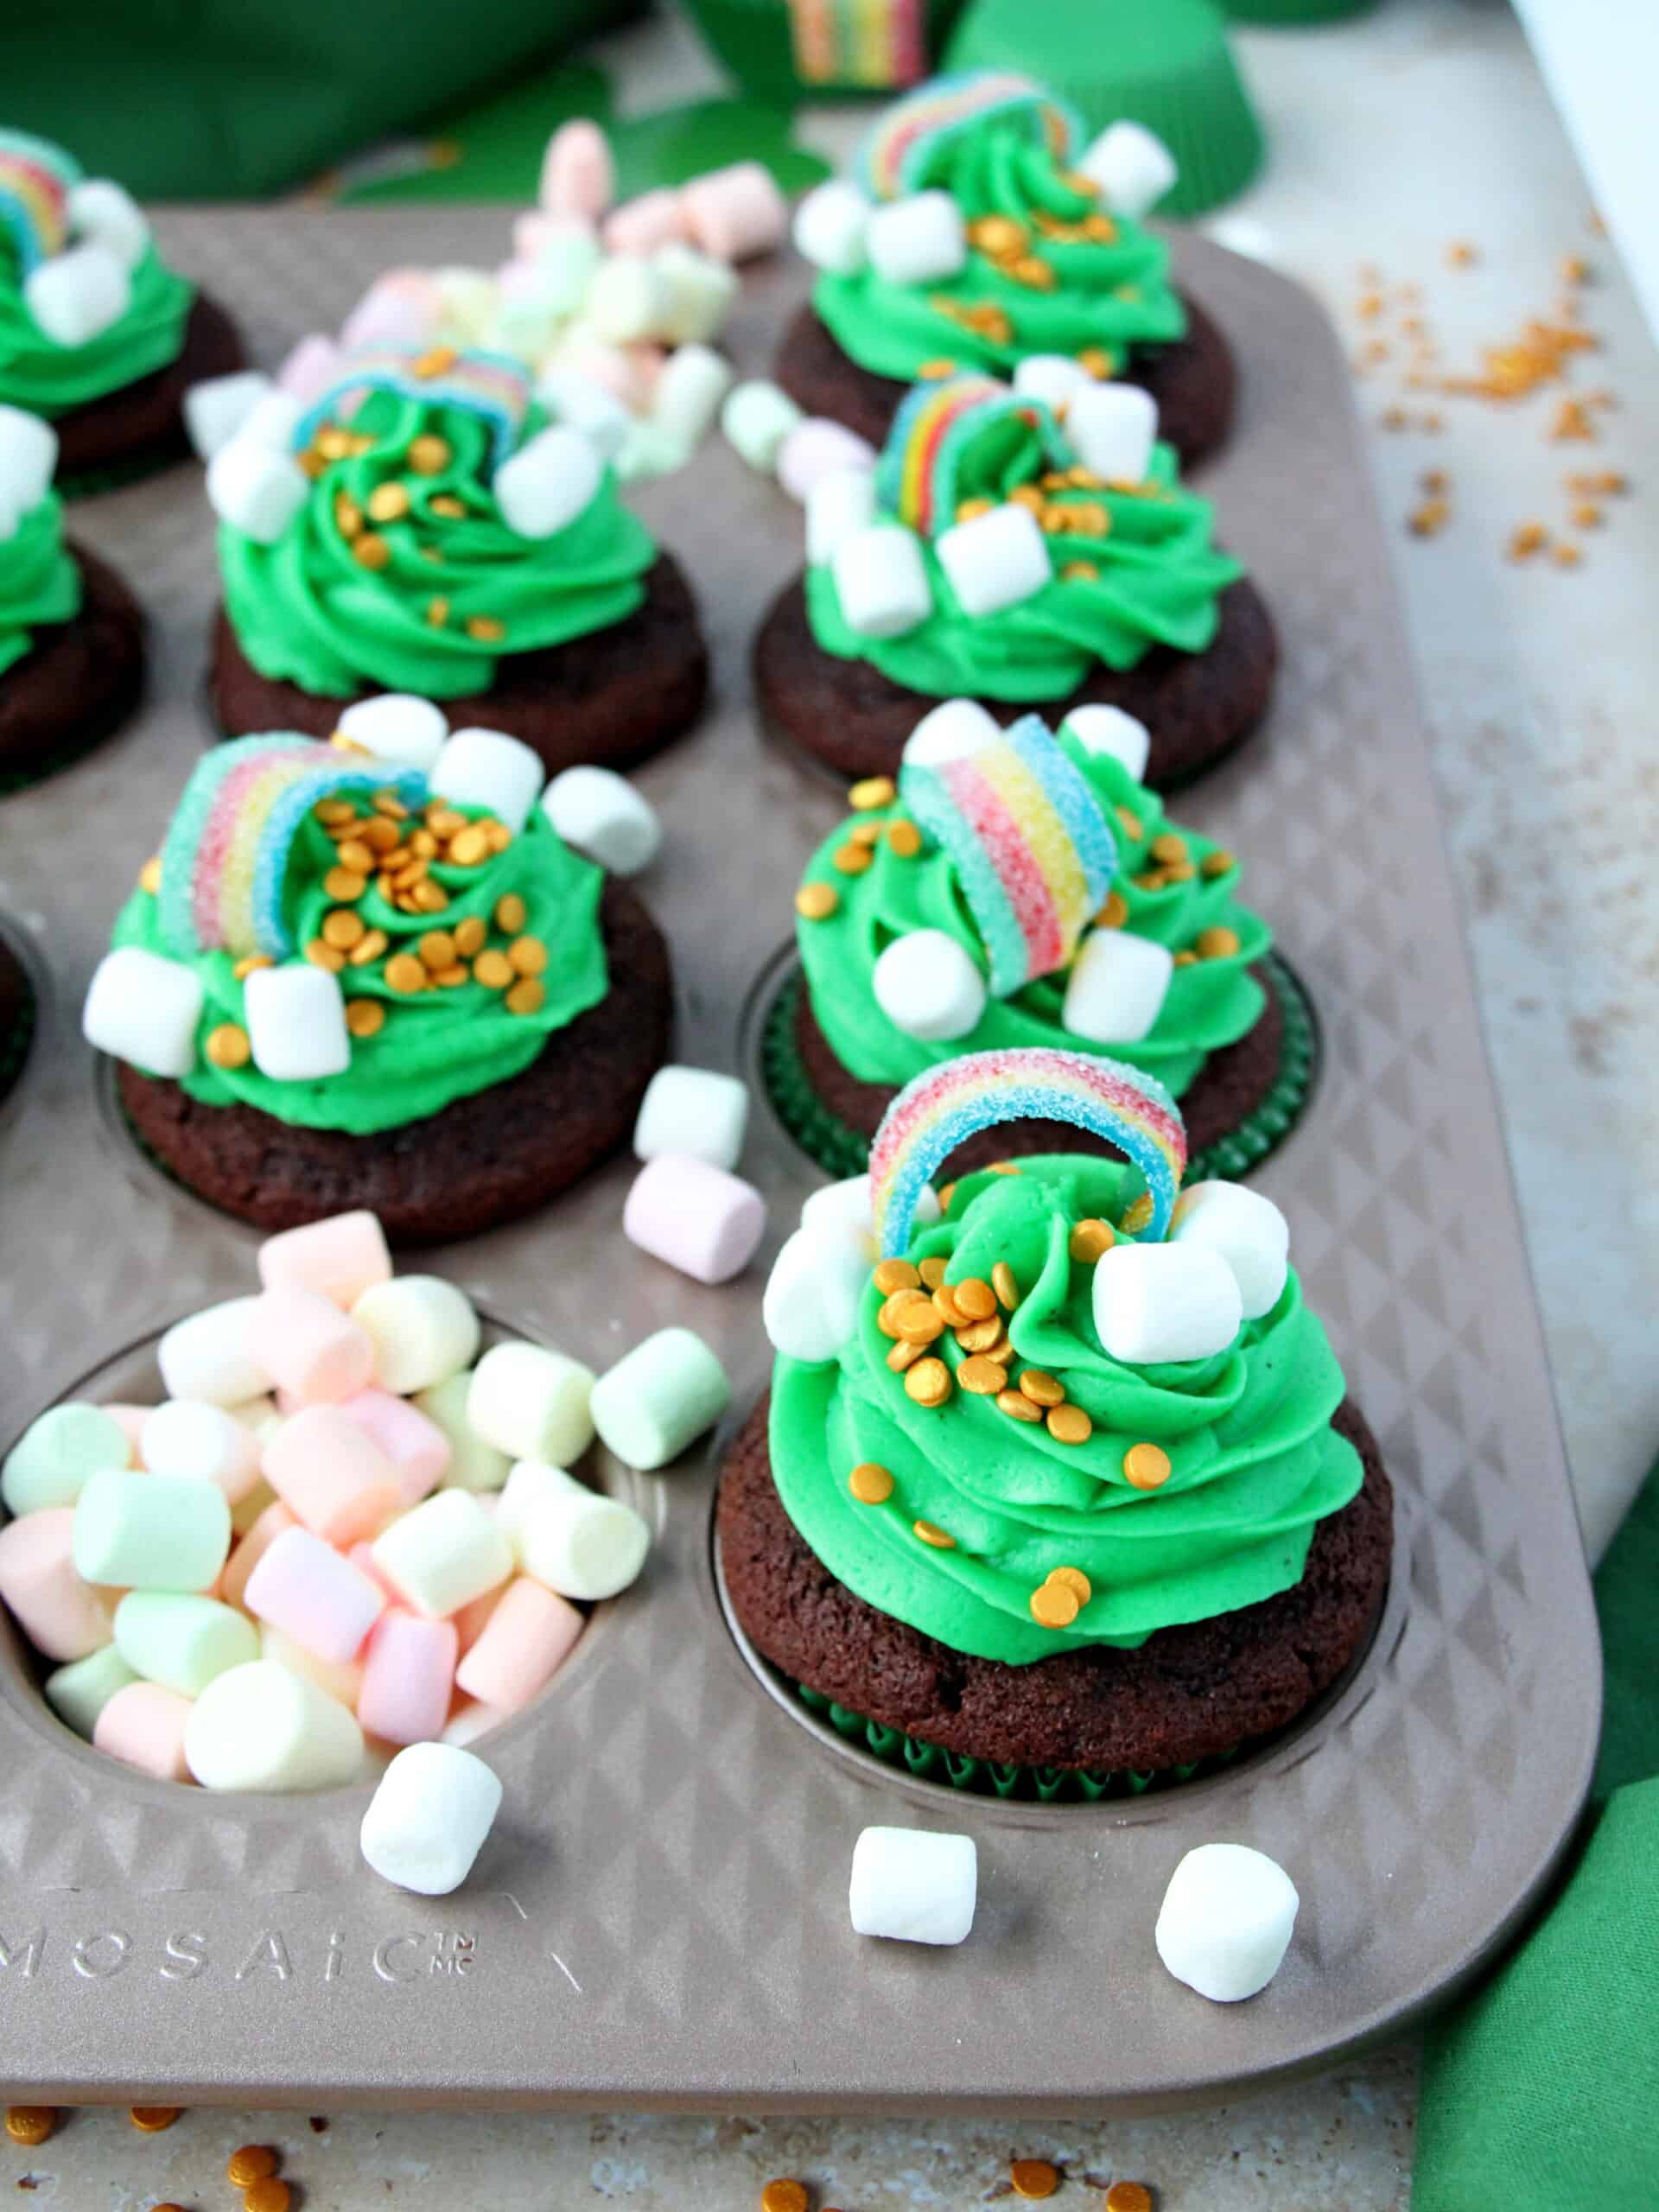 st patrick's day cupcakes with rainbow candies in Mosaic muffin pan